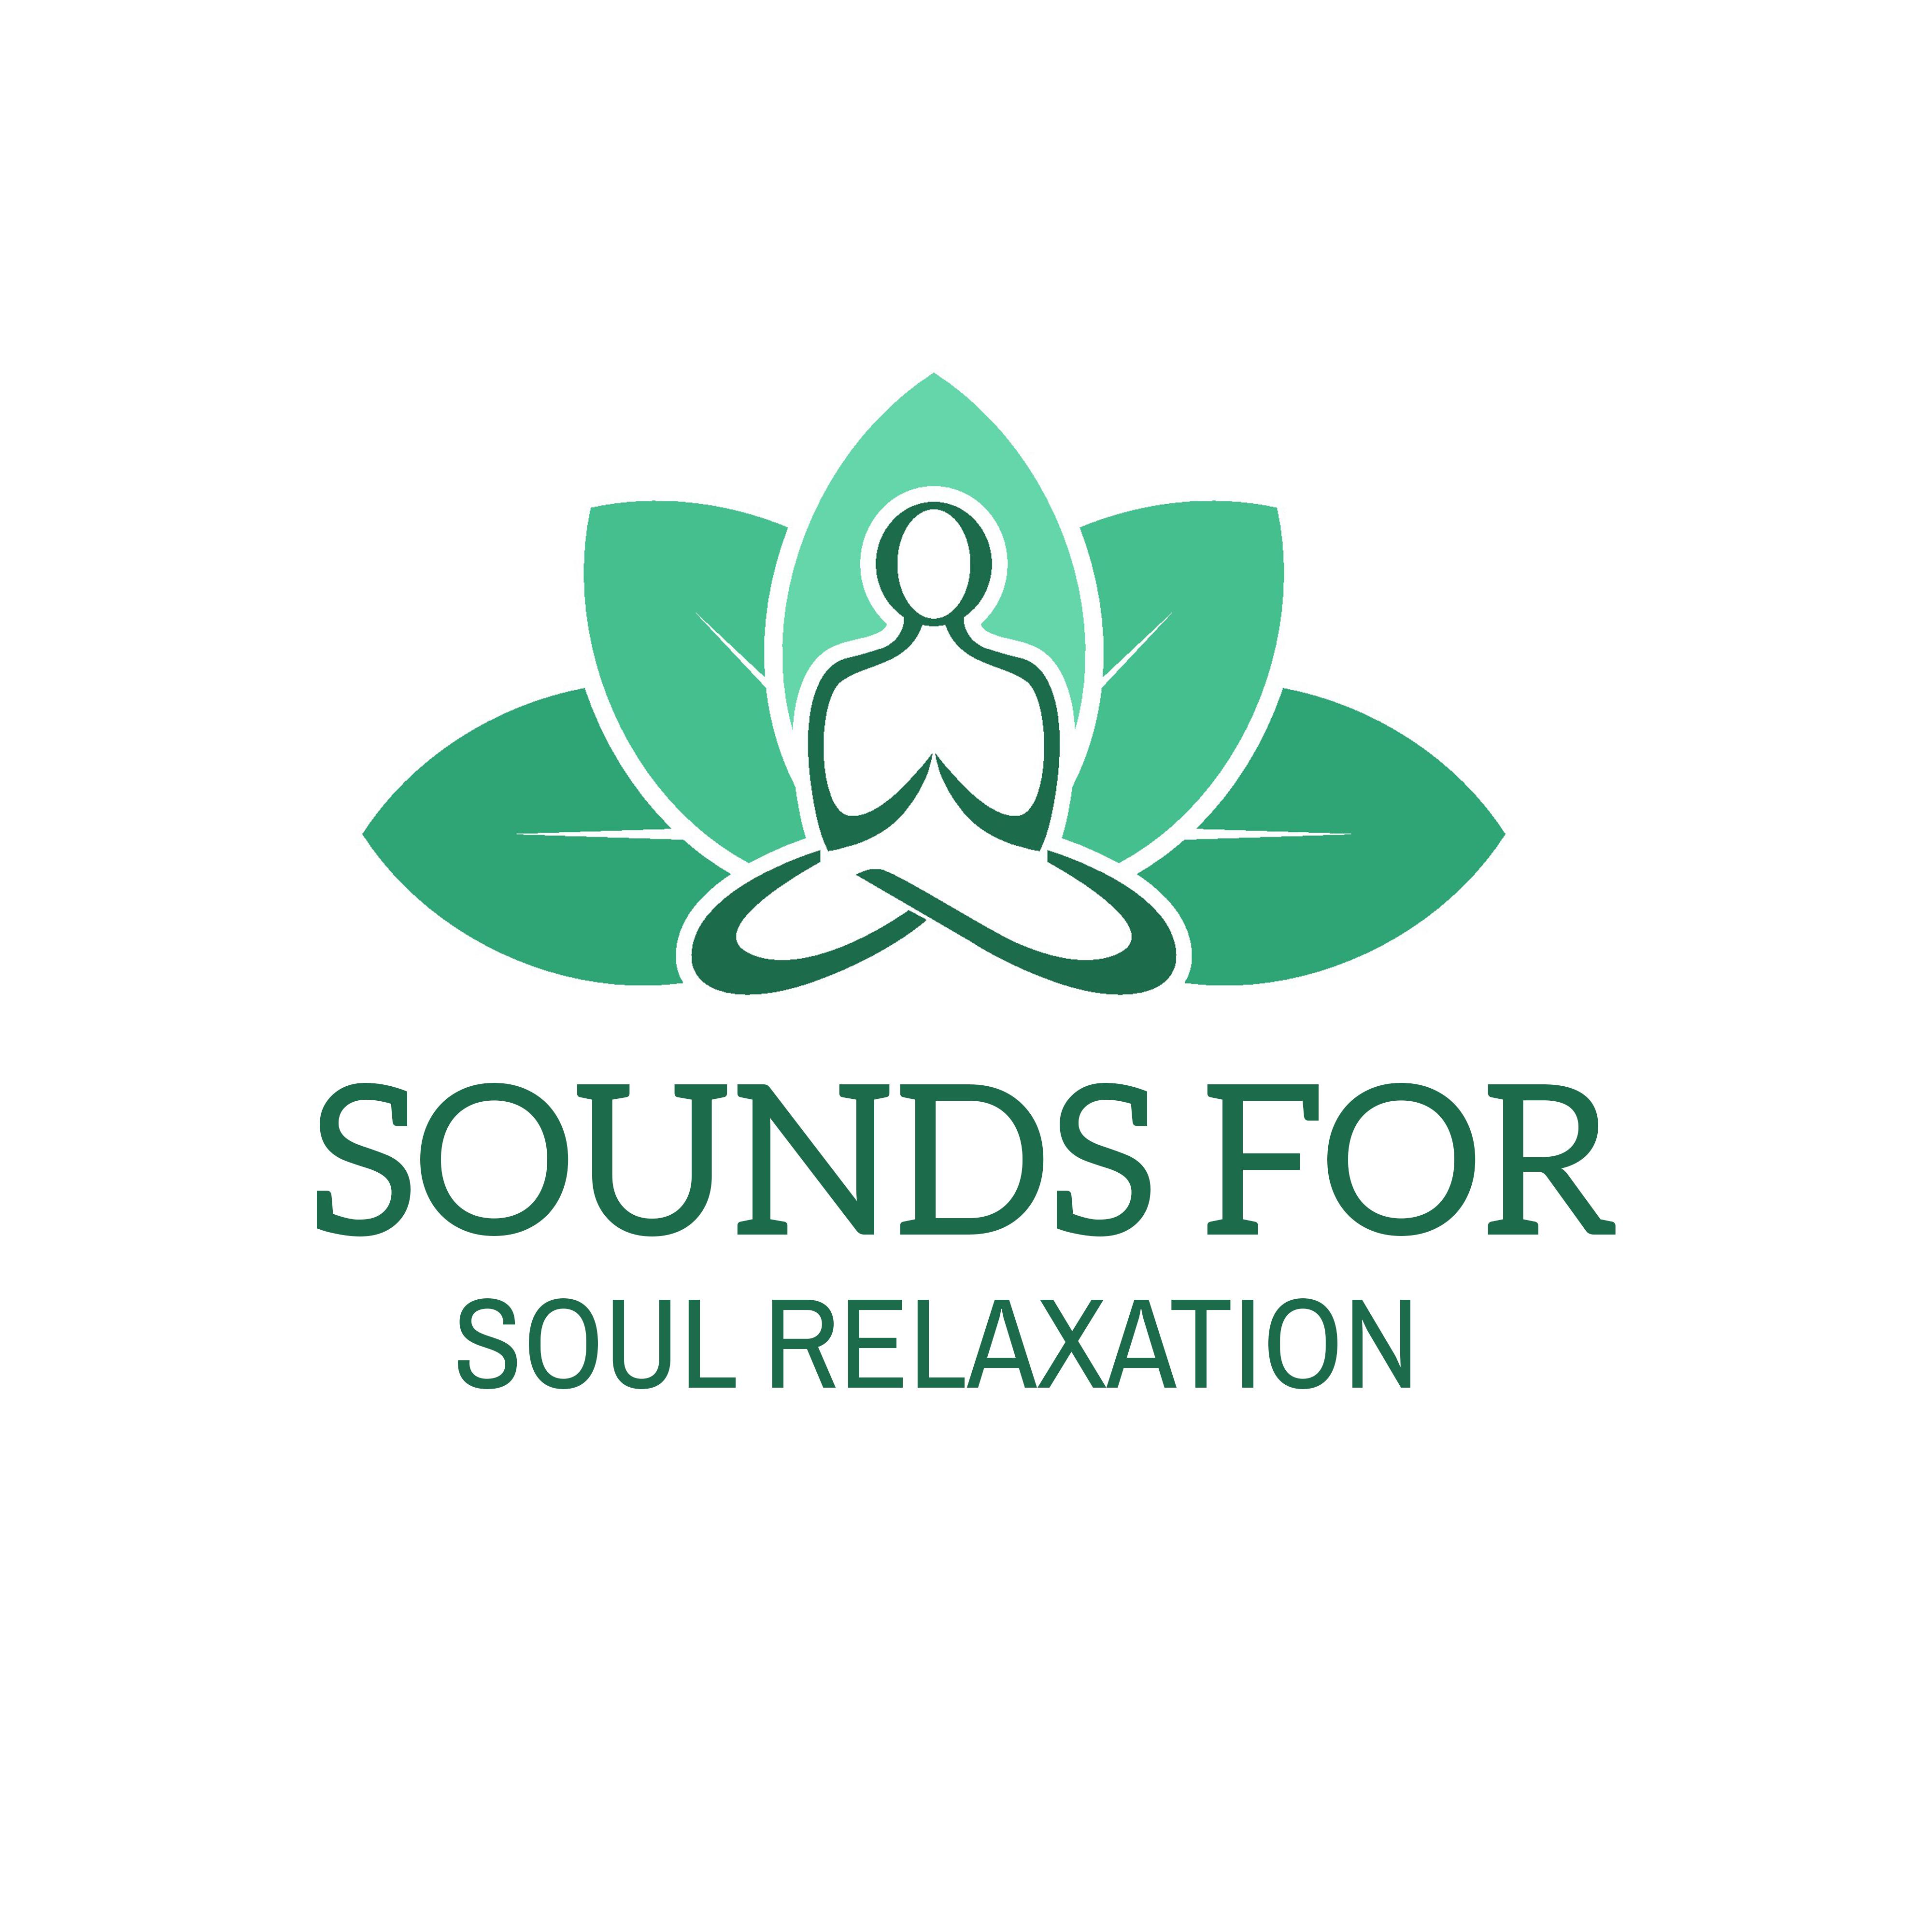 Sounds for Soul Relaxation